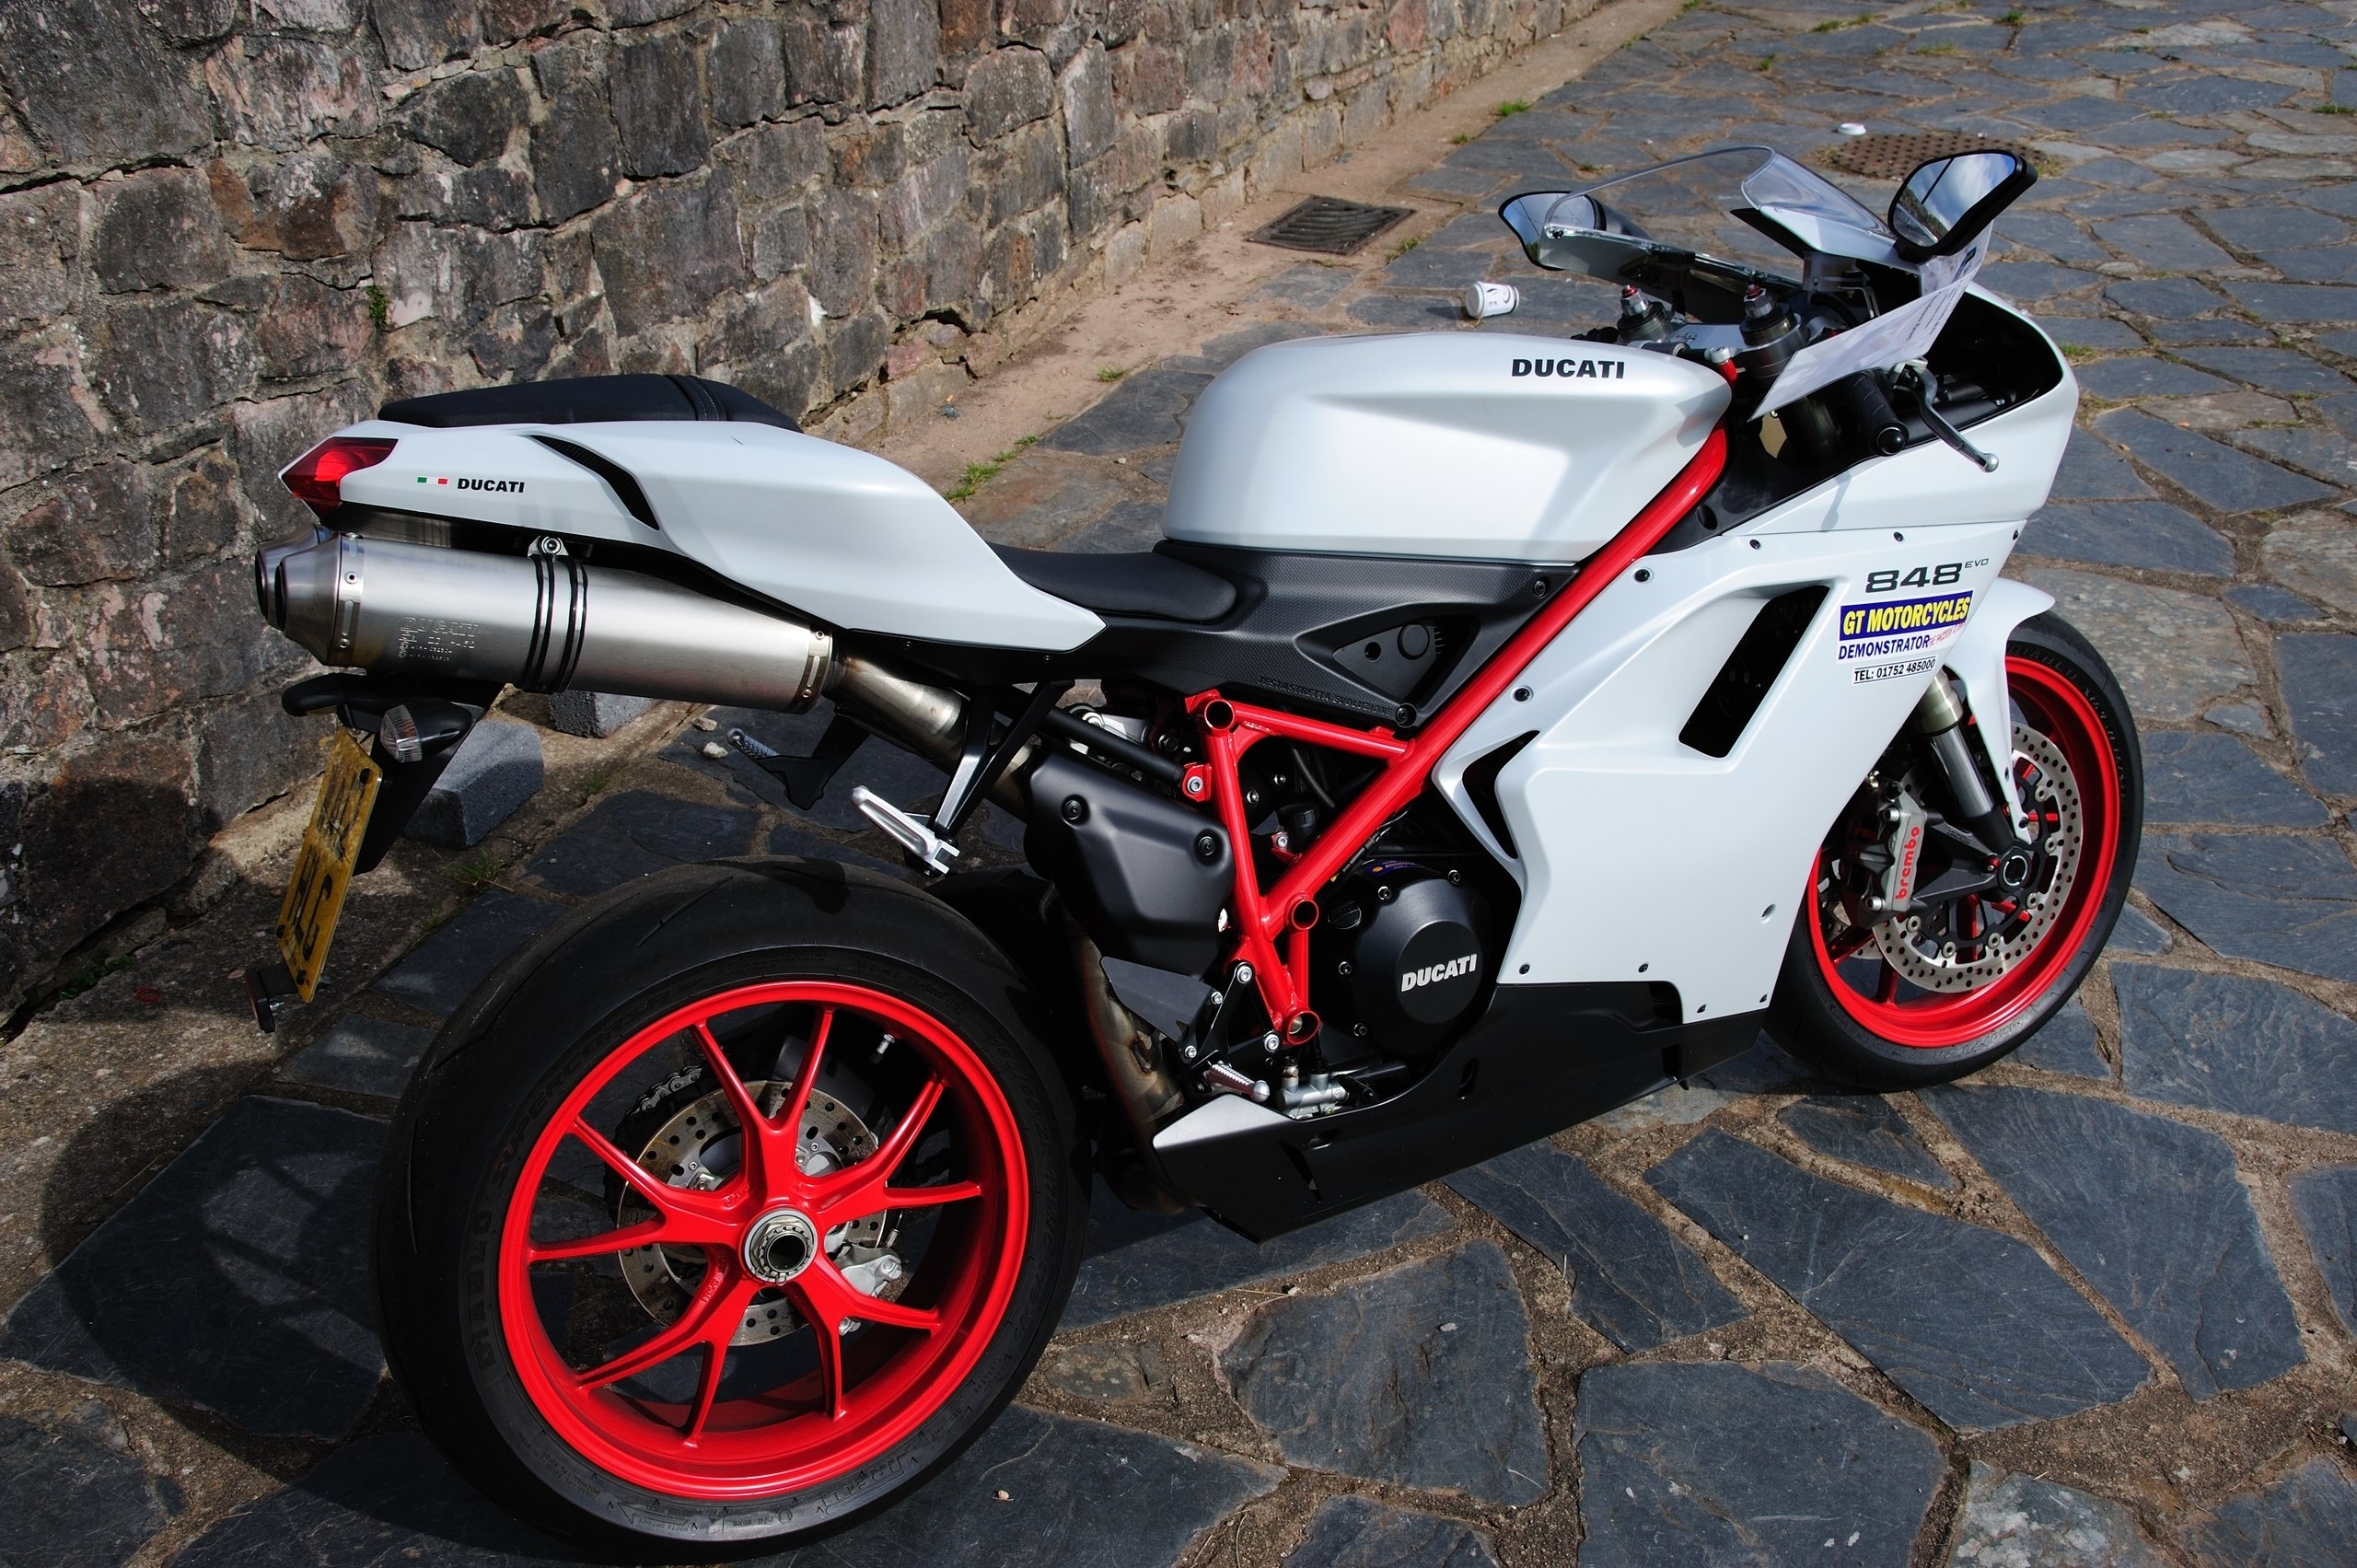 ducati, cars, auto, stones, motorcycles, motorcycle, tile, 848